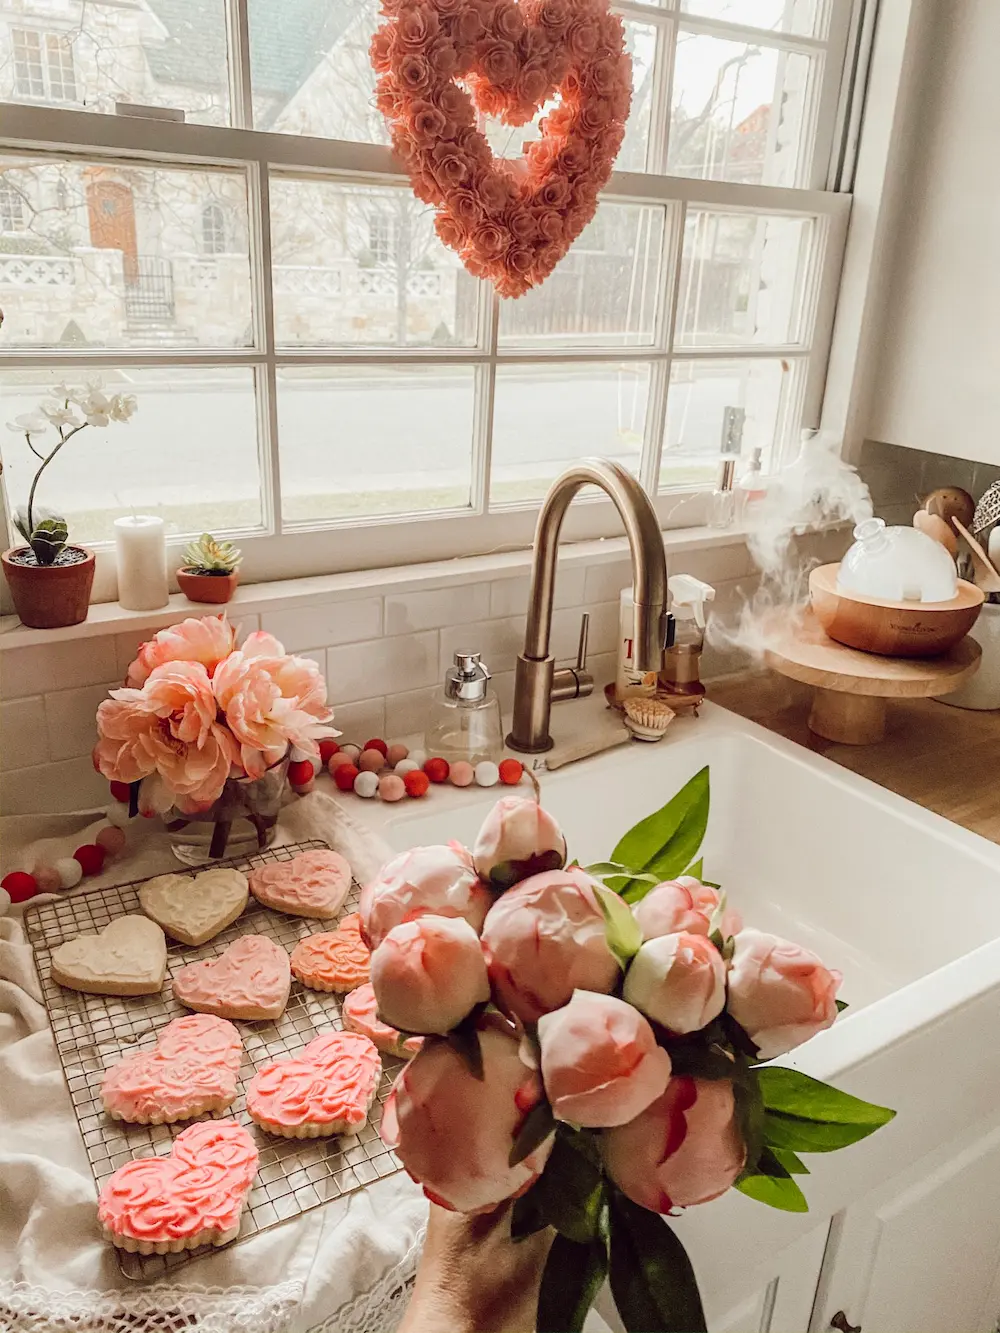 Transform Your Kitchen with these 25 Valentine’s Day Decor Ideas